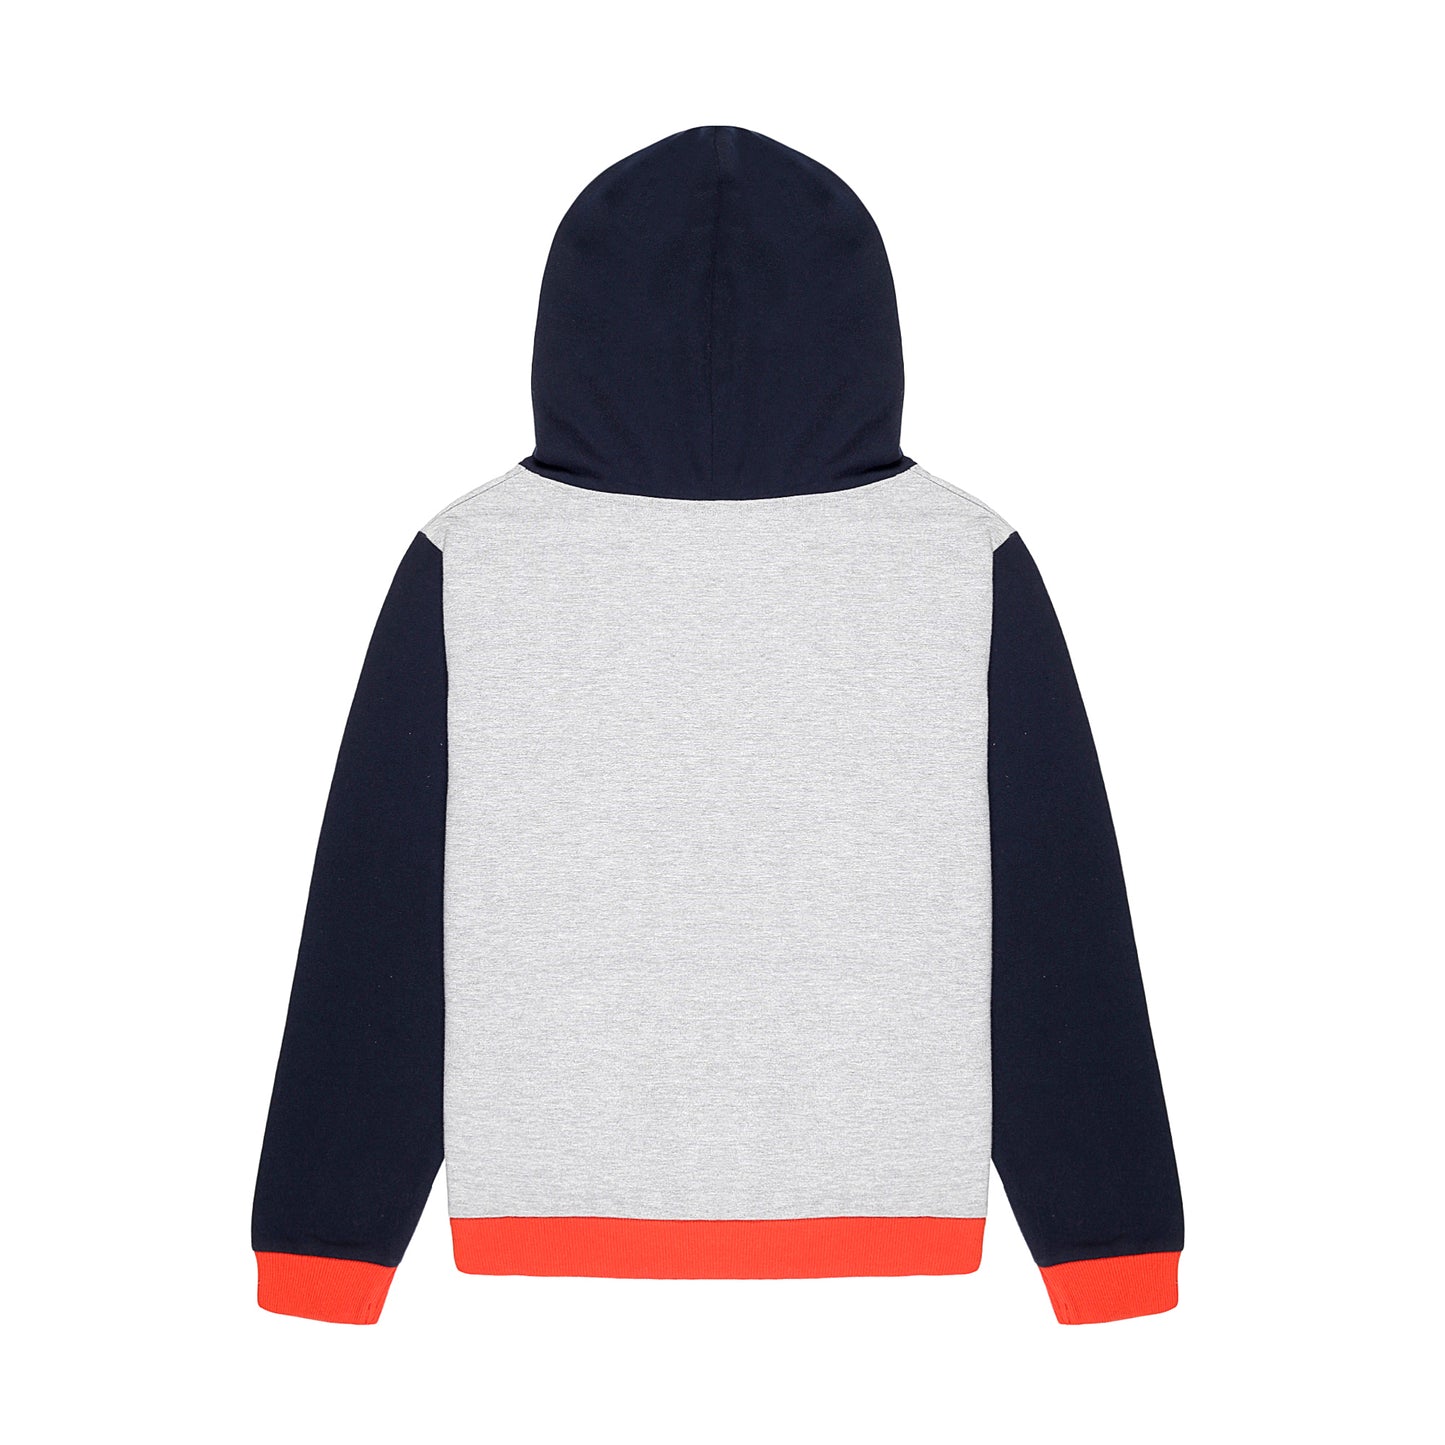 My Bow Unisex Soft Brushed Fleece Casual Basic Pullover Hooded Sweatshirt for Boys and Girls (4 to 14 Years)